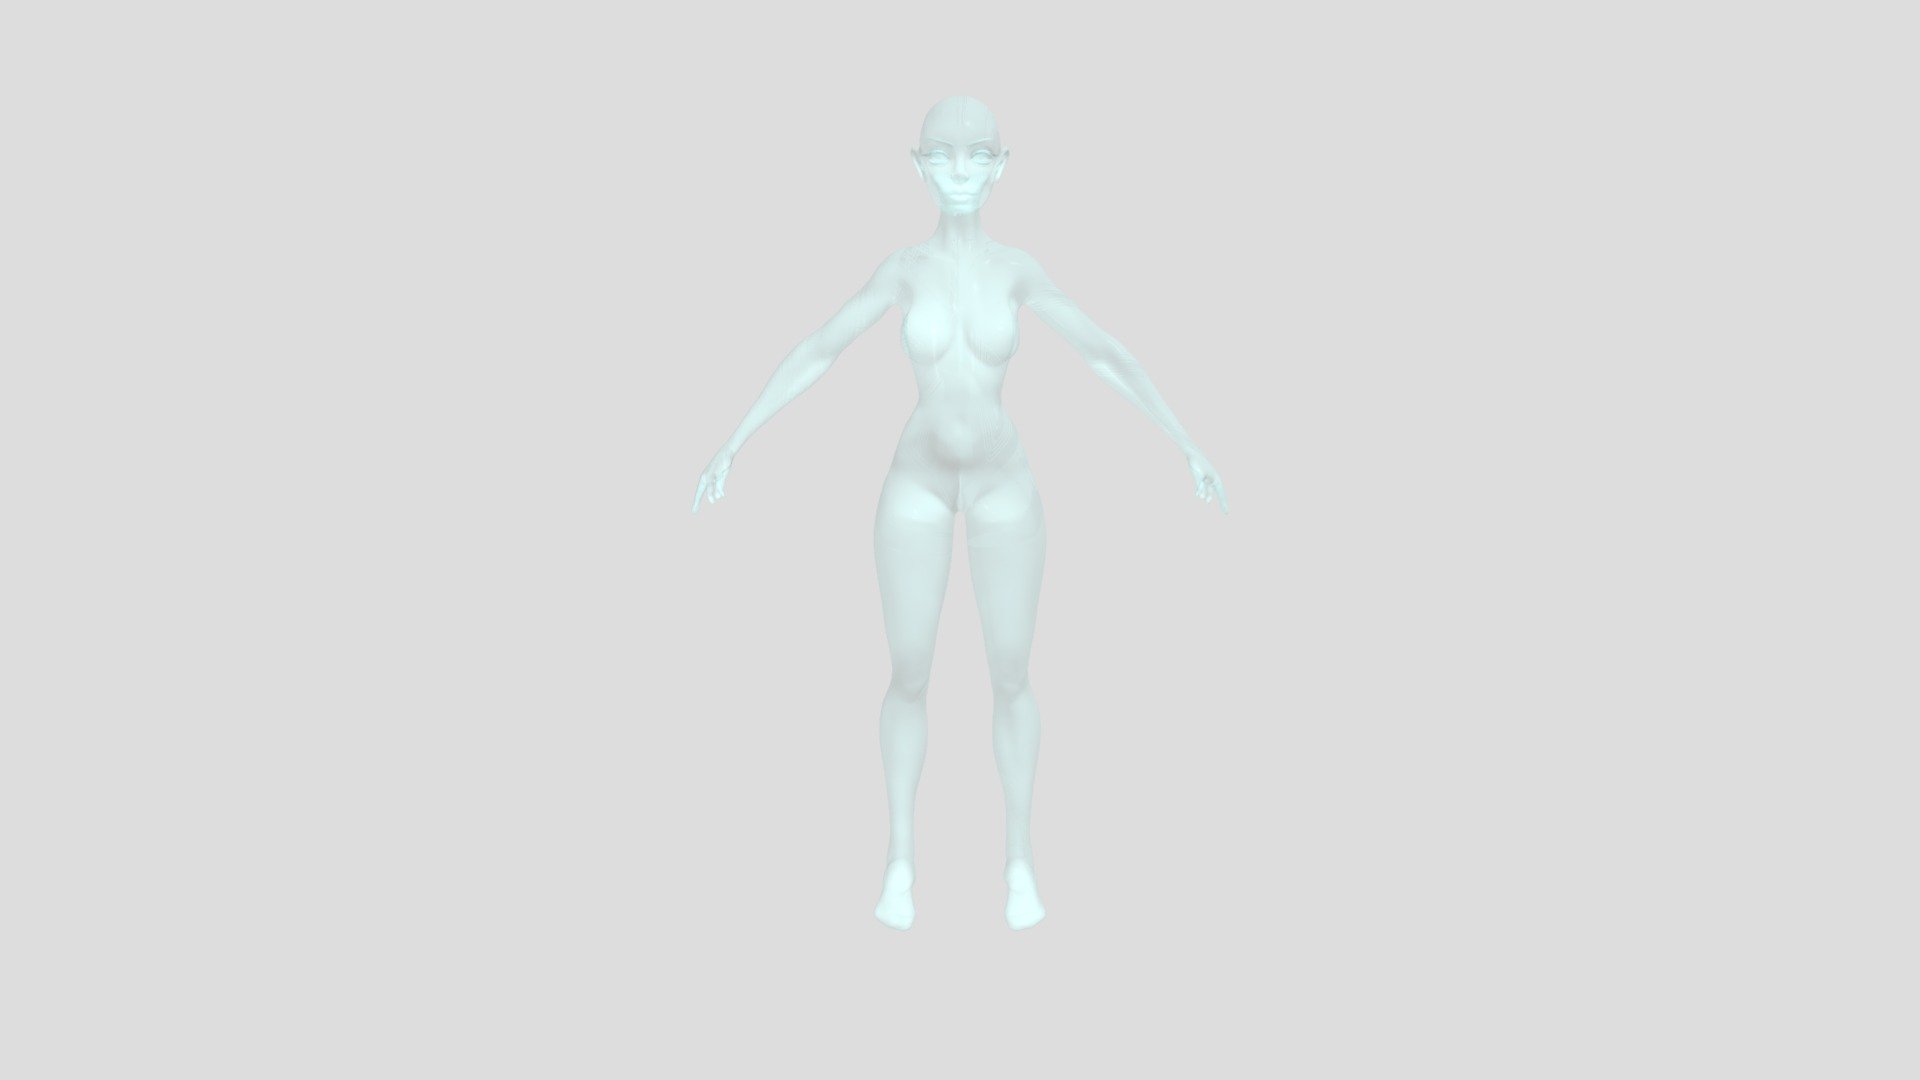 Transparent Woman - Download Free 3D model by tokaidogamer1 [c7d40e1 ...